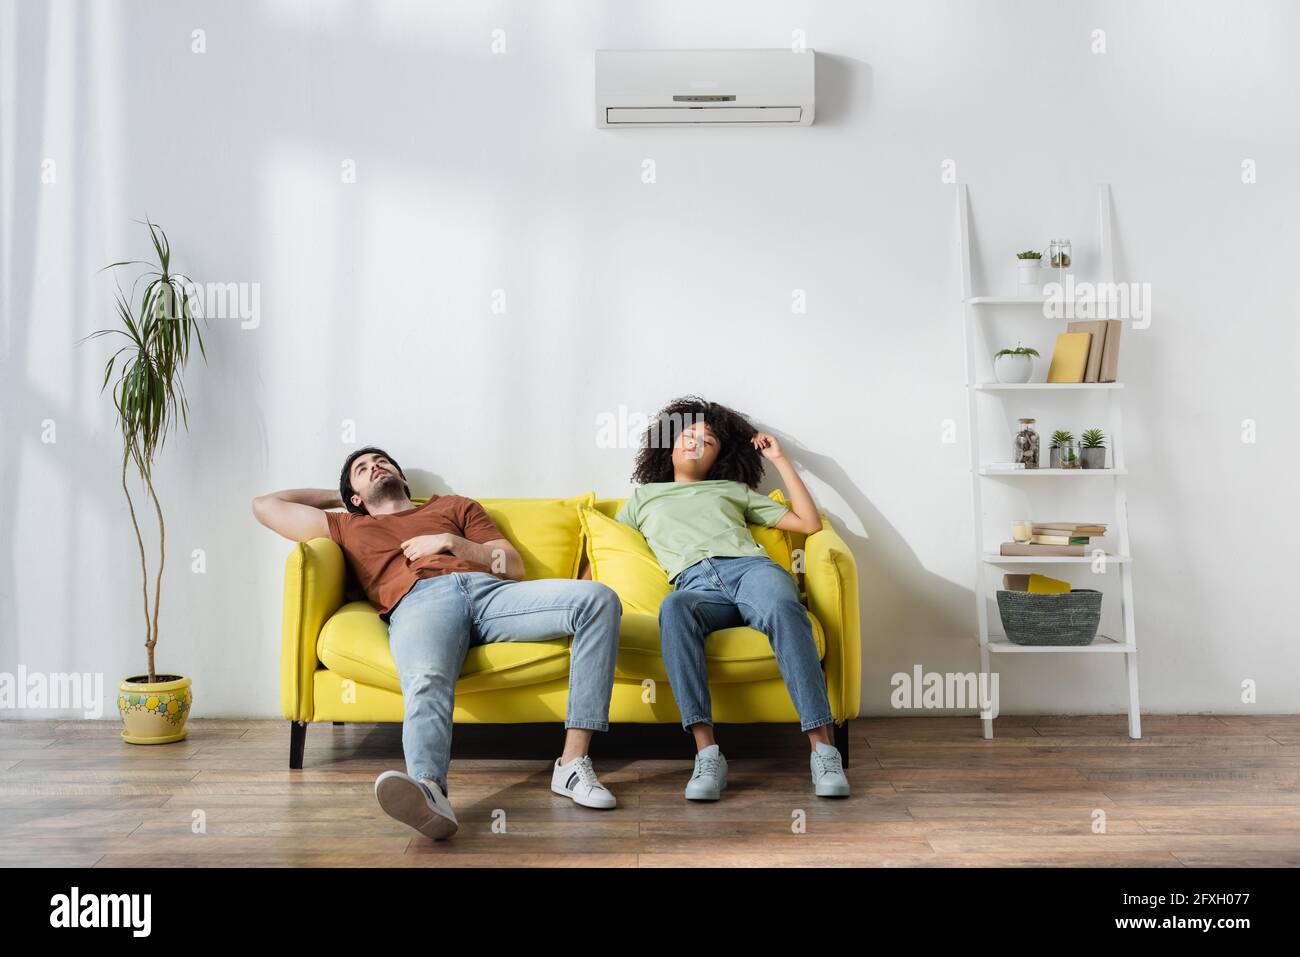 exhausted multiethnic couple sitting on yellow sofa and suffering from heat in summer Stock Photo